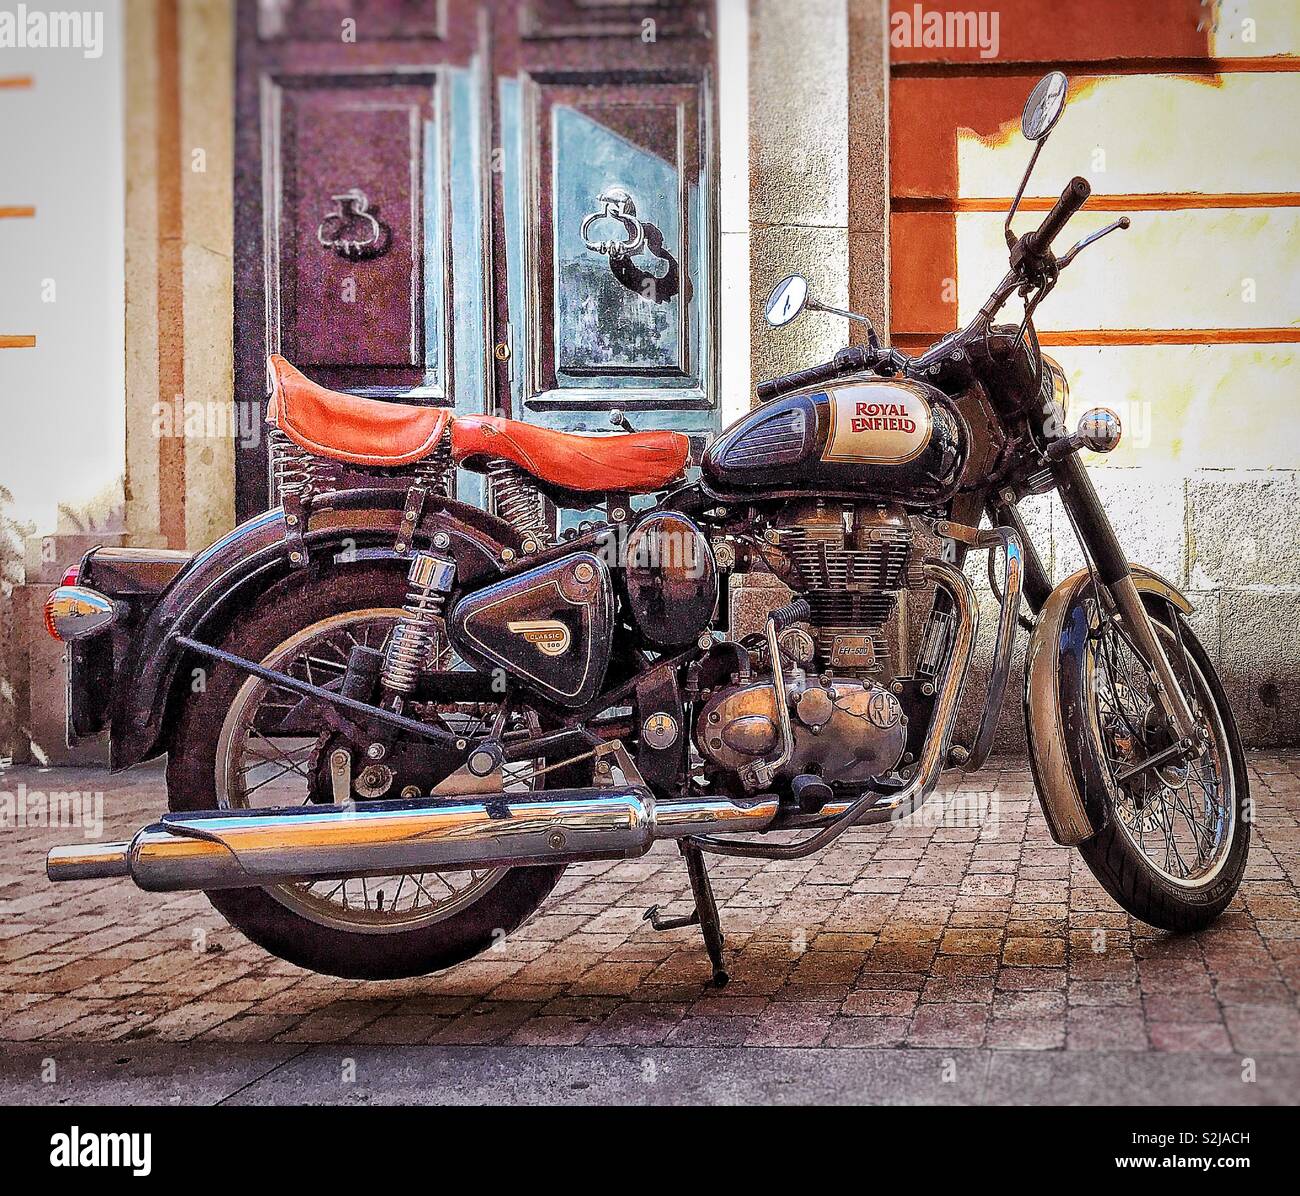 A vintage Royal Enfield motorbike parked on a cobblestone pavement in front of the entrance of a building. The entrance comprises a wooden door Stock Photo